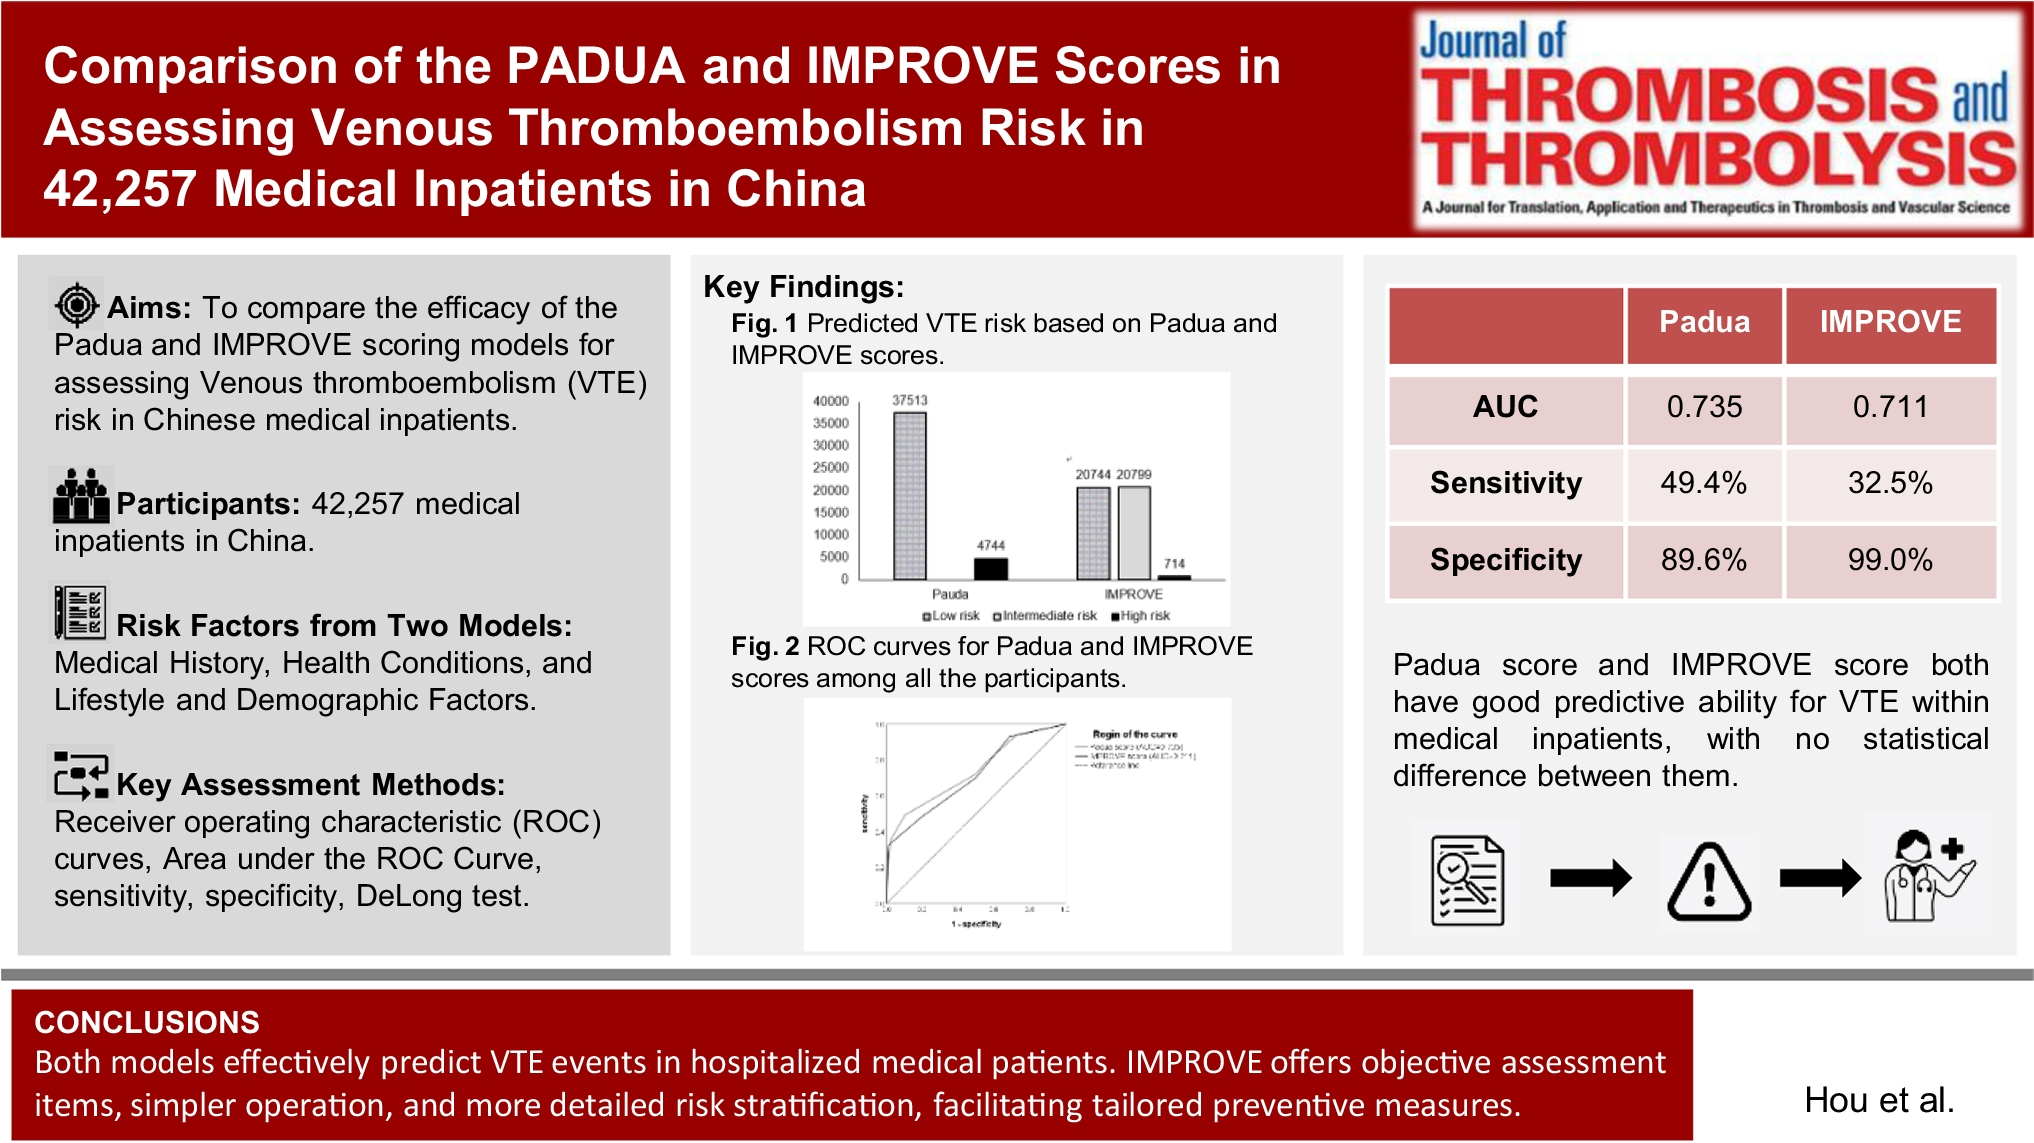 Comparison of the PADUA and IMPROVE scores in assessing venous thromboembolism risk in 42,257 medical inpatients in China